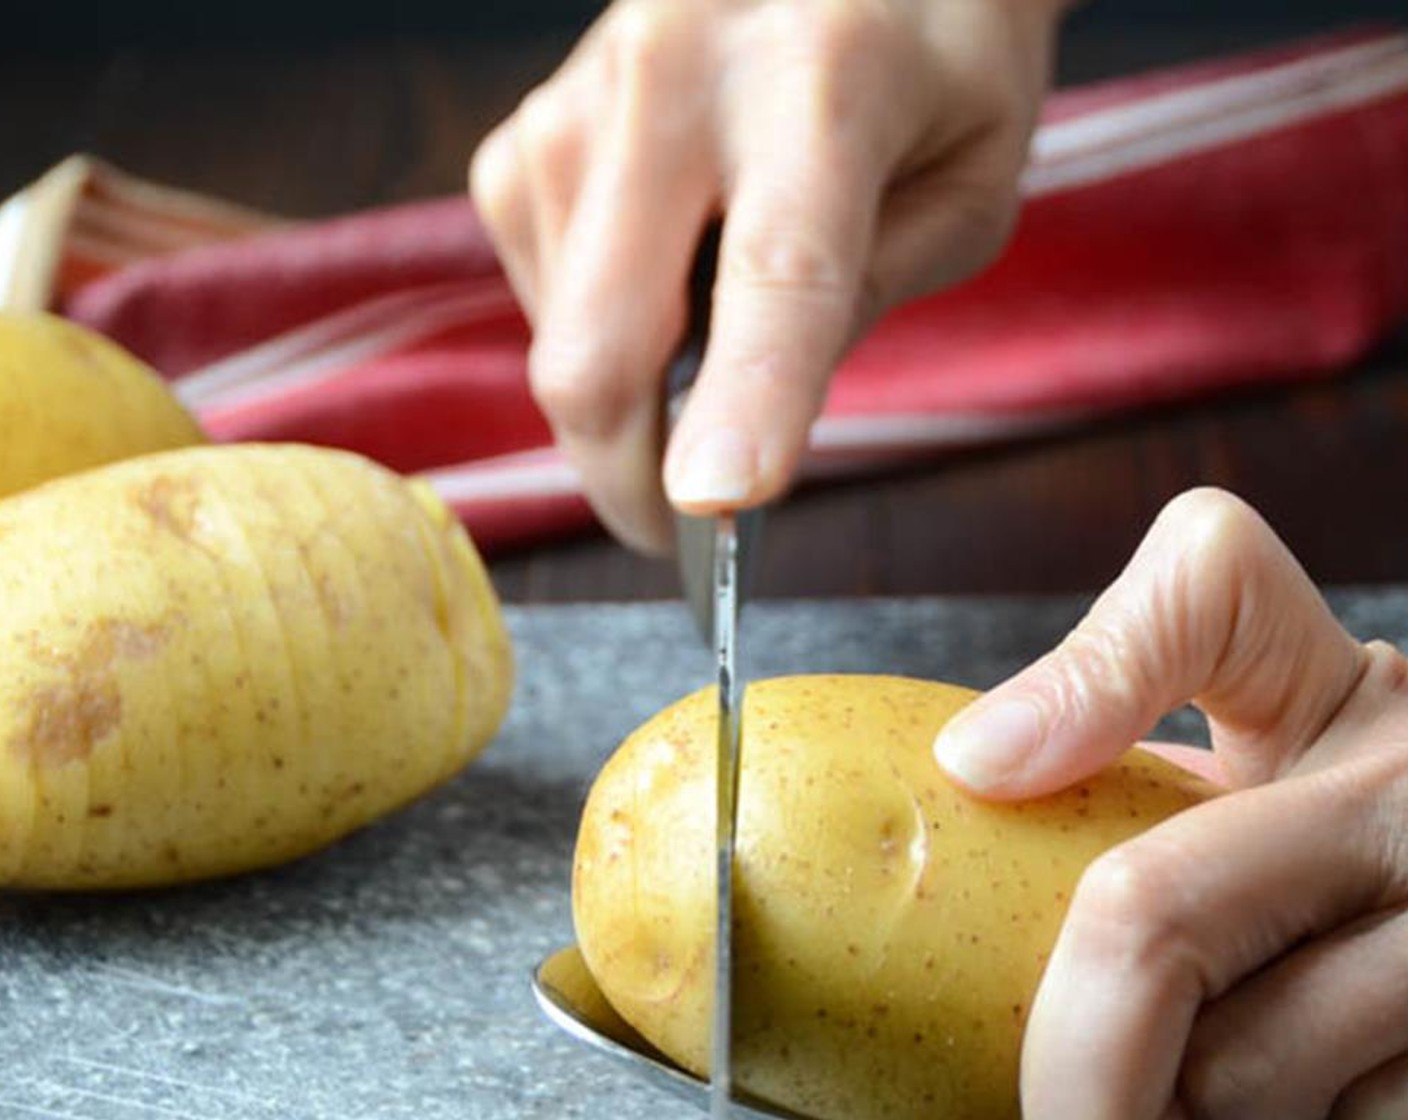 step 11 Place a Yukon Gold Potatoes (4) on a large spoon. Use a sharp knife to cut thin slices, about 1/8-1/4" thick. The edges of the spoon will prevent you from slicing all the way through the potato, creating that accordion effect.